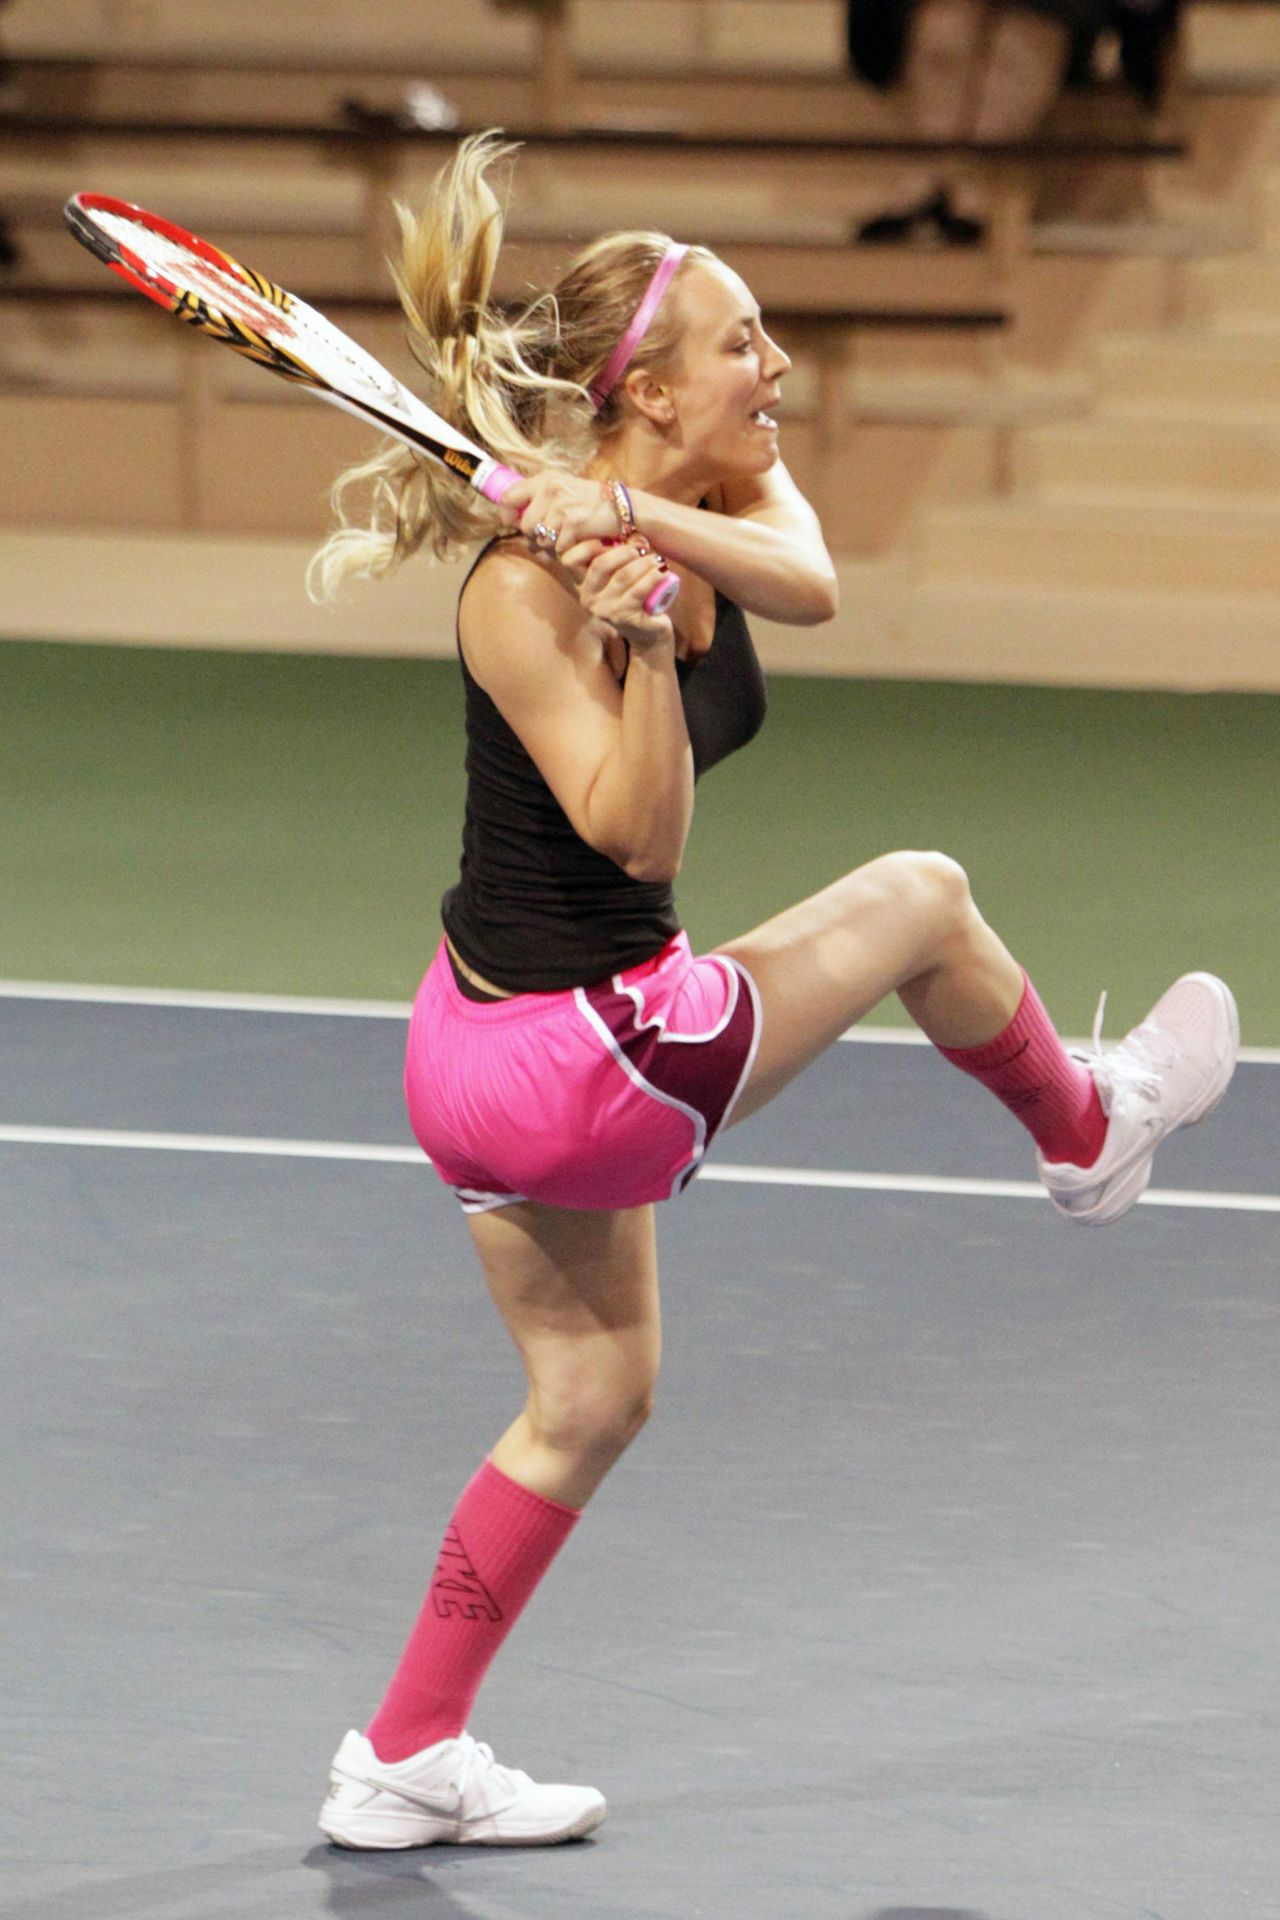 kaley-cuoco-tennis-match-for-charity-in-calabasa-march-2014_9.jpg